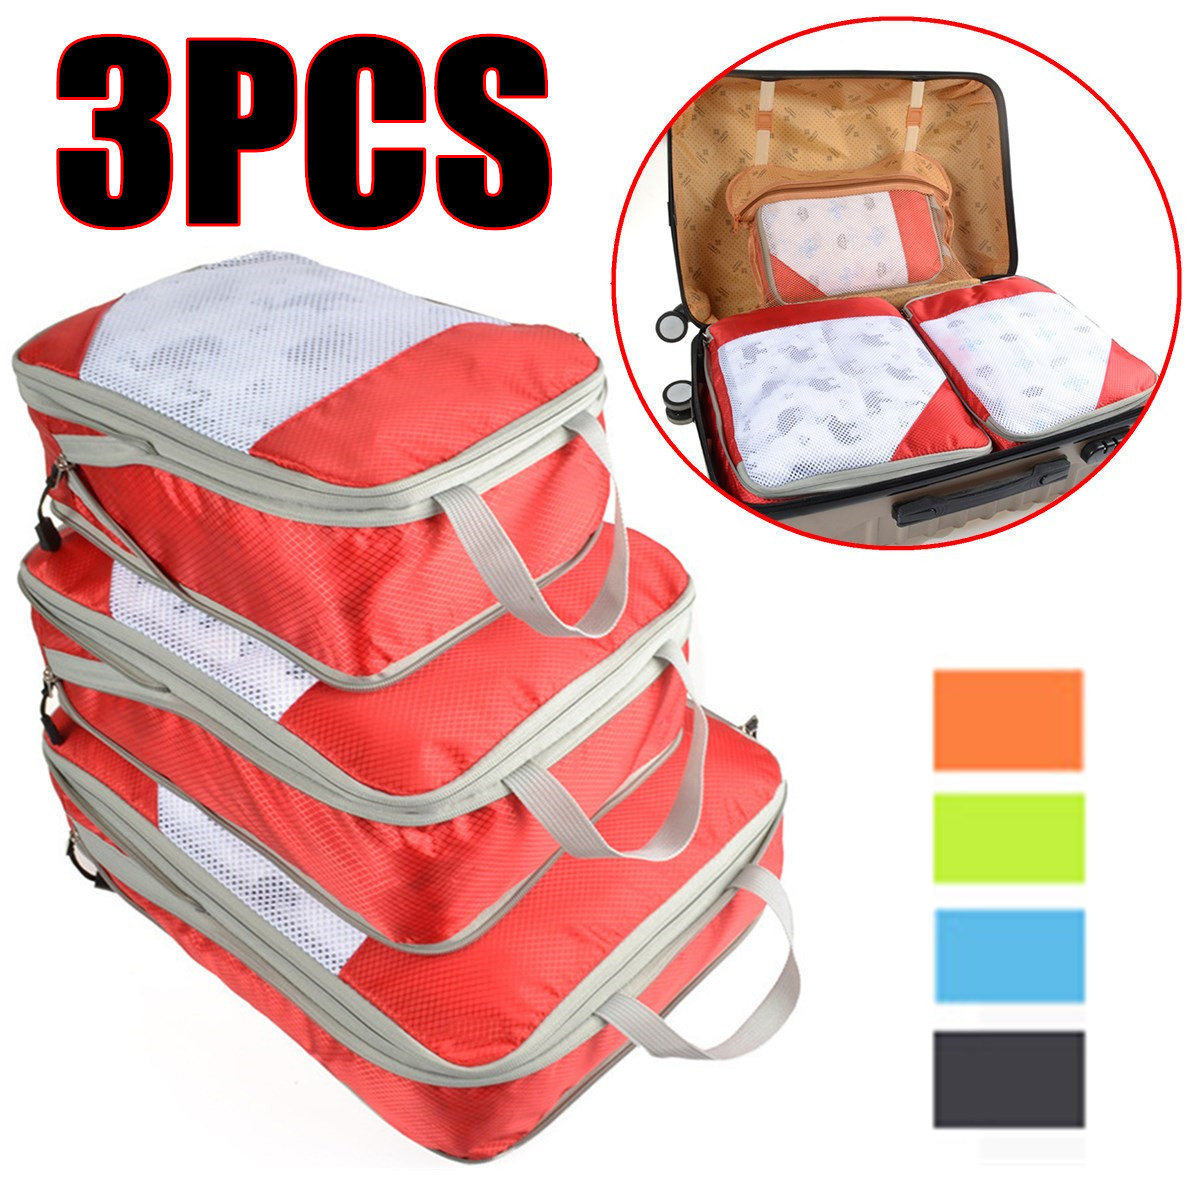 3PCS-Waterproof-Packing-Bags-Outdoor-Traveling-Luggage-Storage-Bag-Clothes-Bags-1603720-1